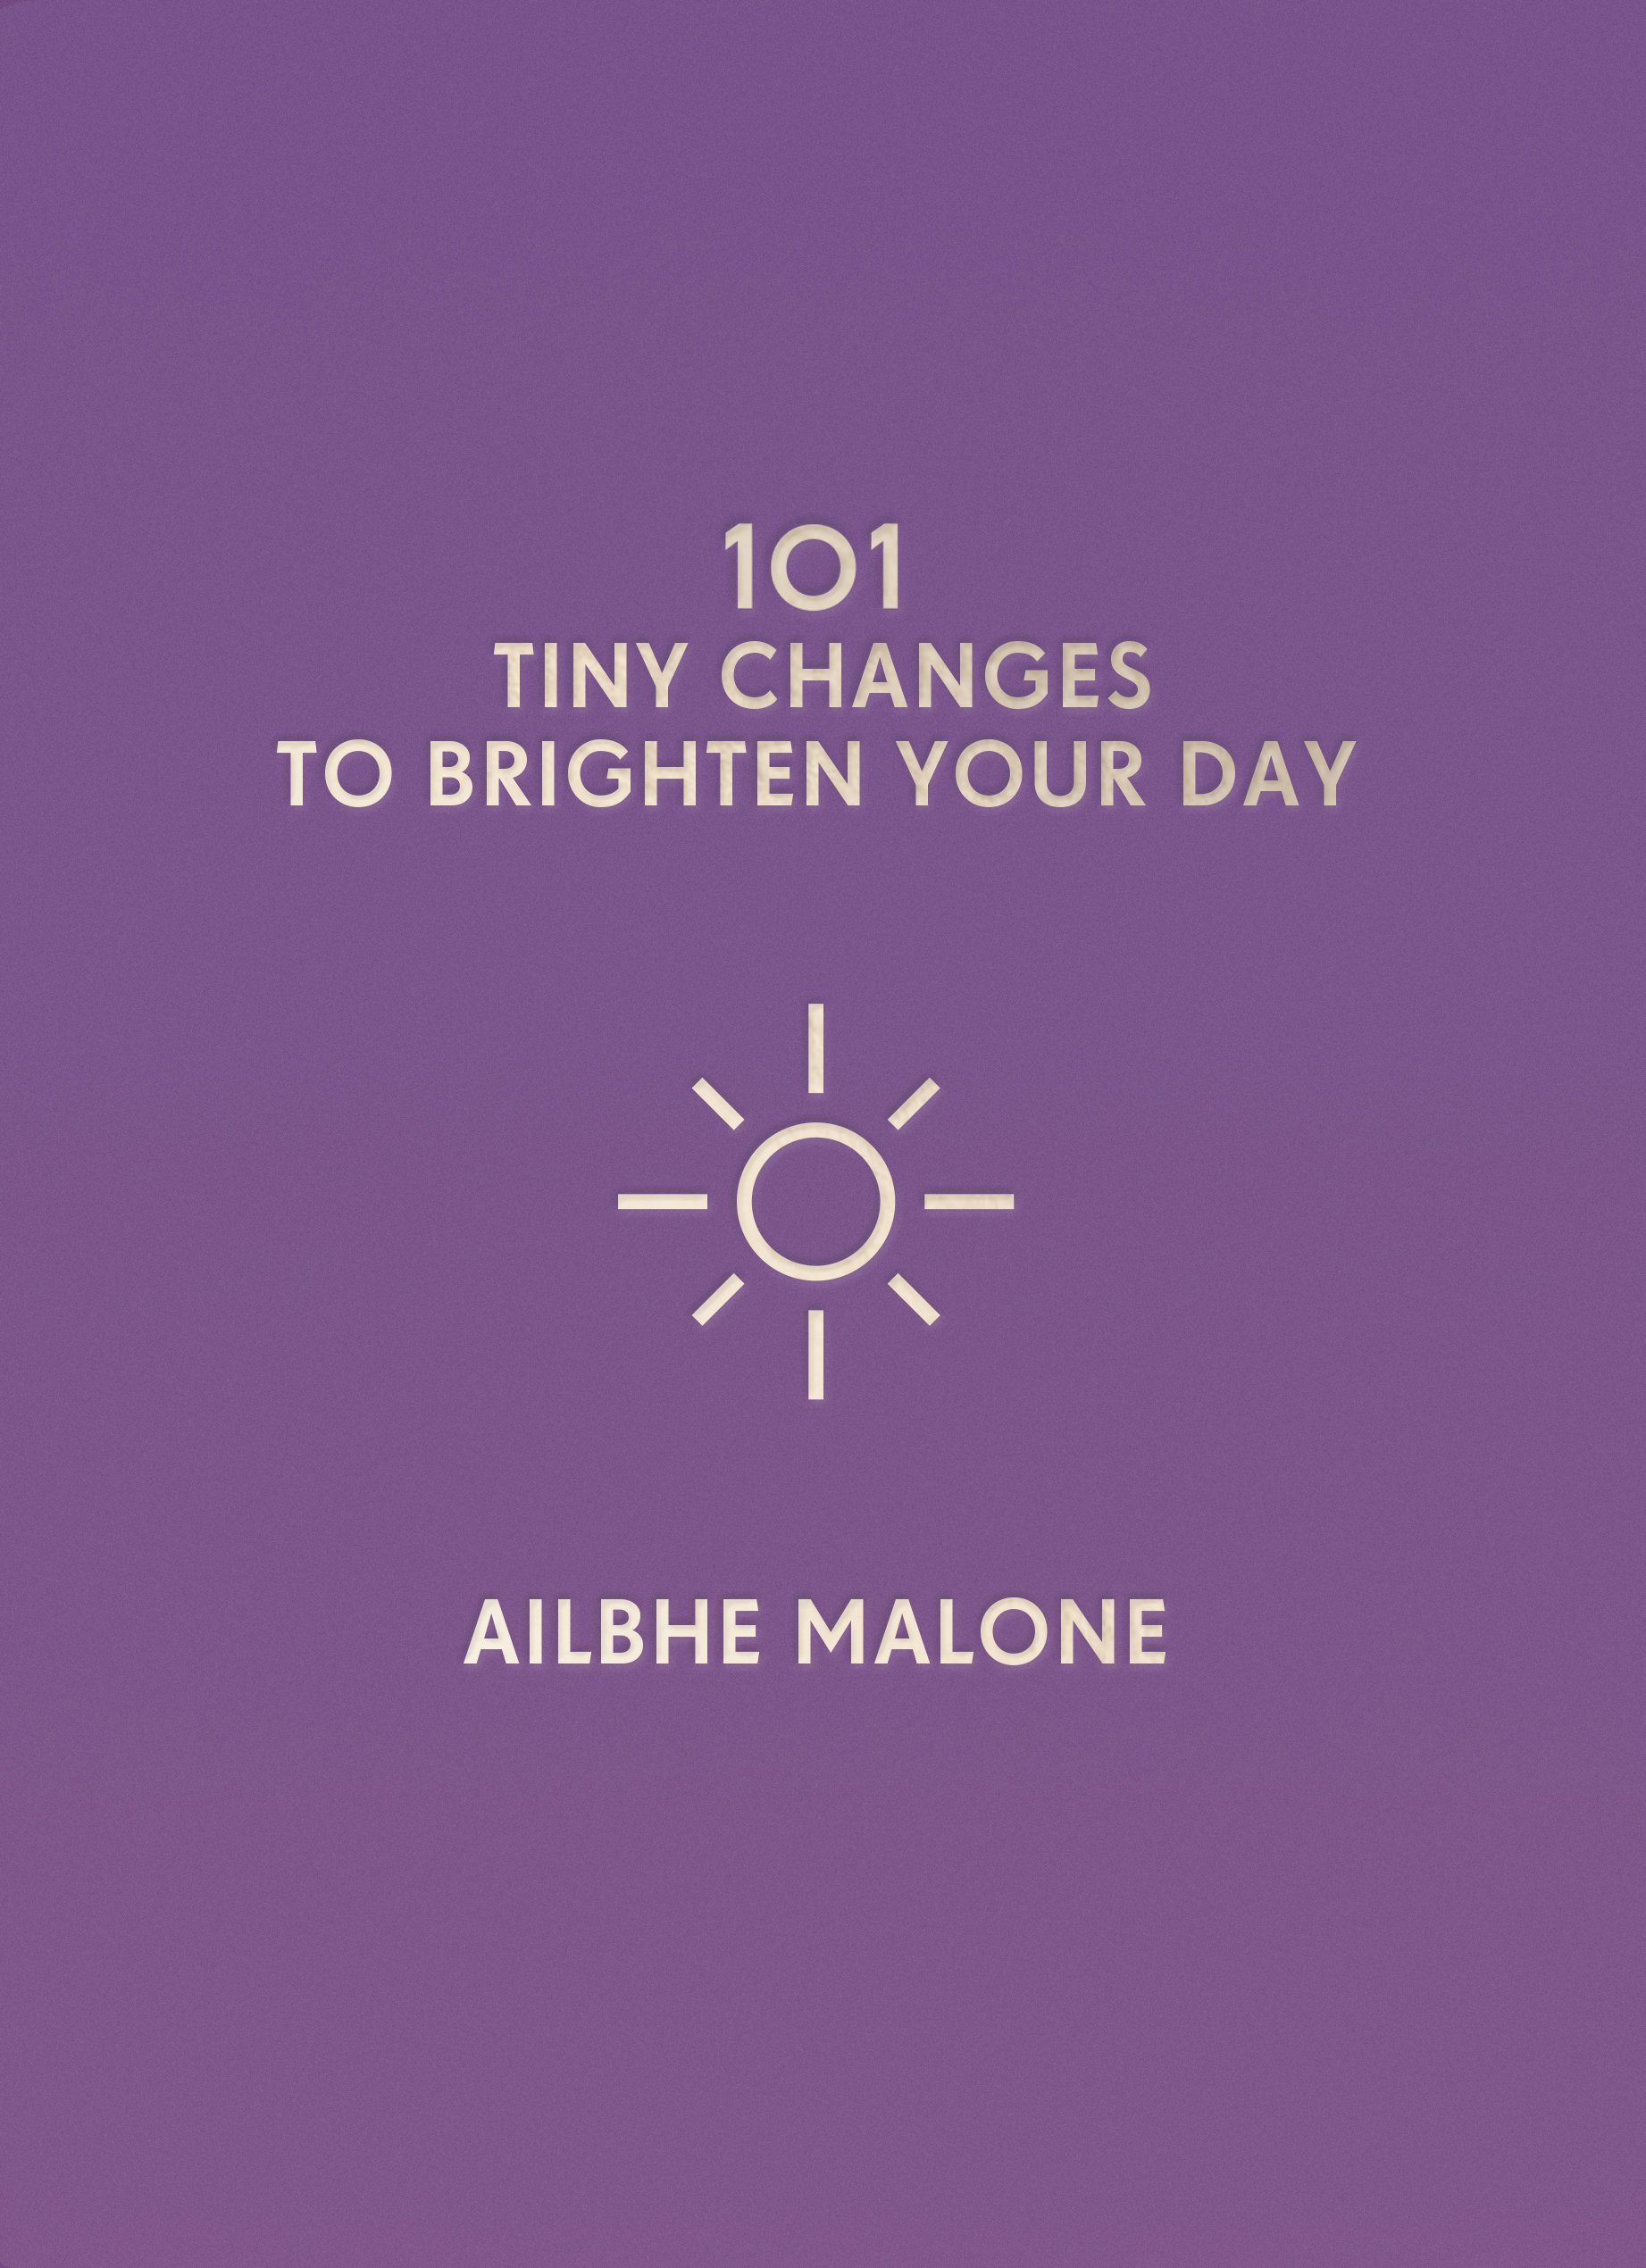 101 Tiny Changes to Brighten Your Day | Ailbhe Malone